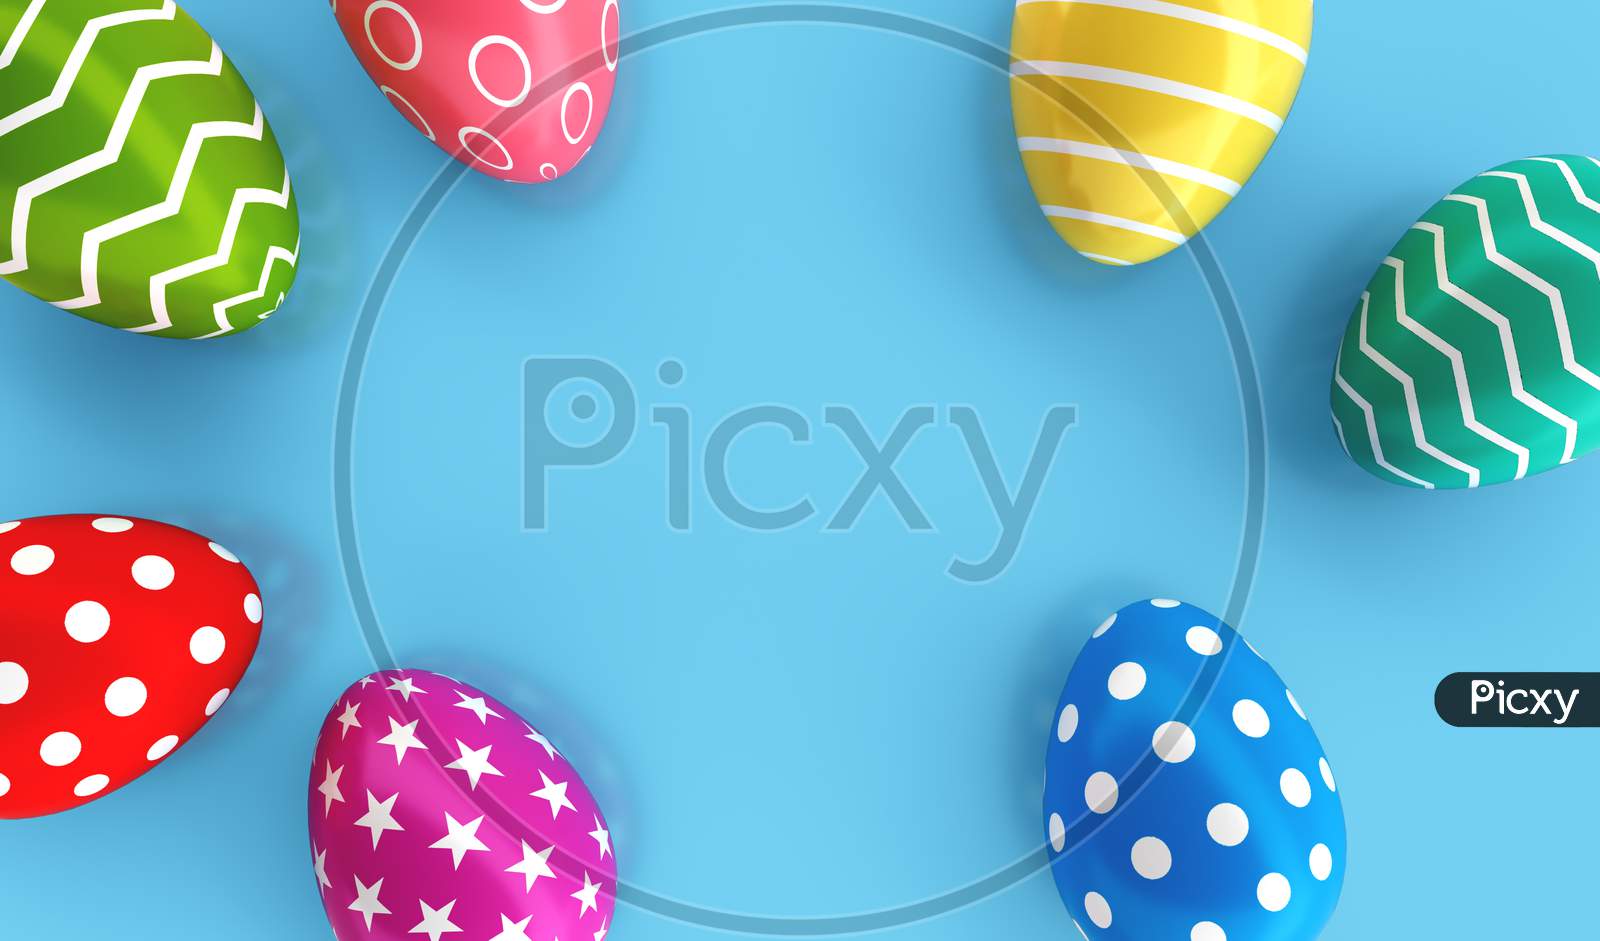 Top View Of Colorful Painted Easter Eggs On Blue Floor Background. Holiday And Festival Concept. Dot Star And Line Fantasy Pattern Art. 3D Illustration With Copy Space